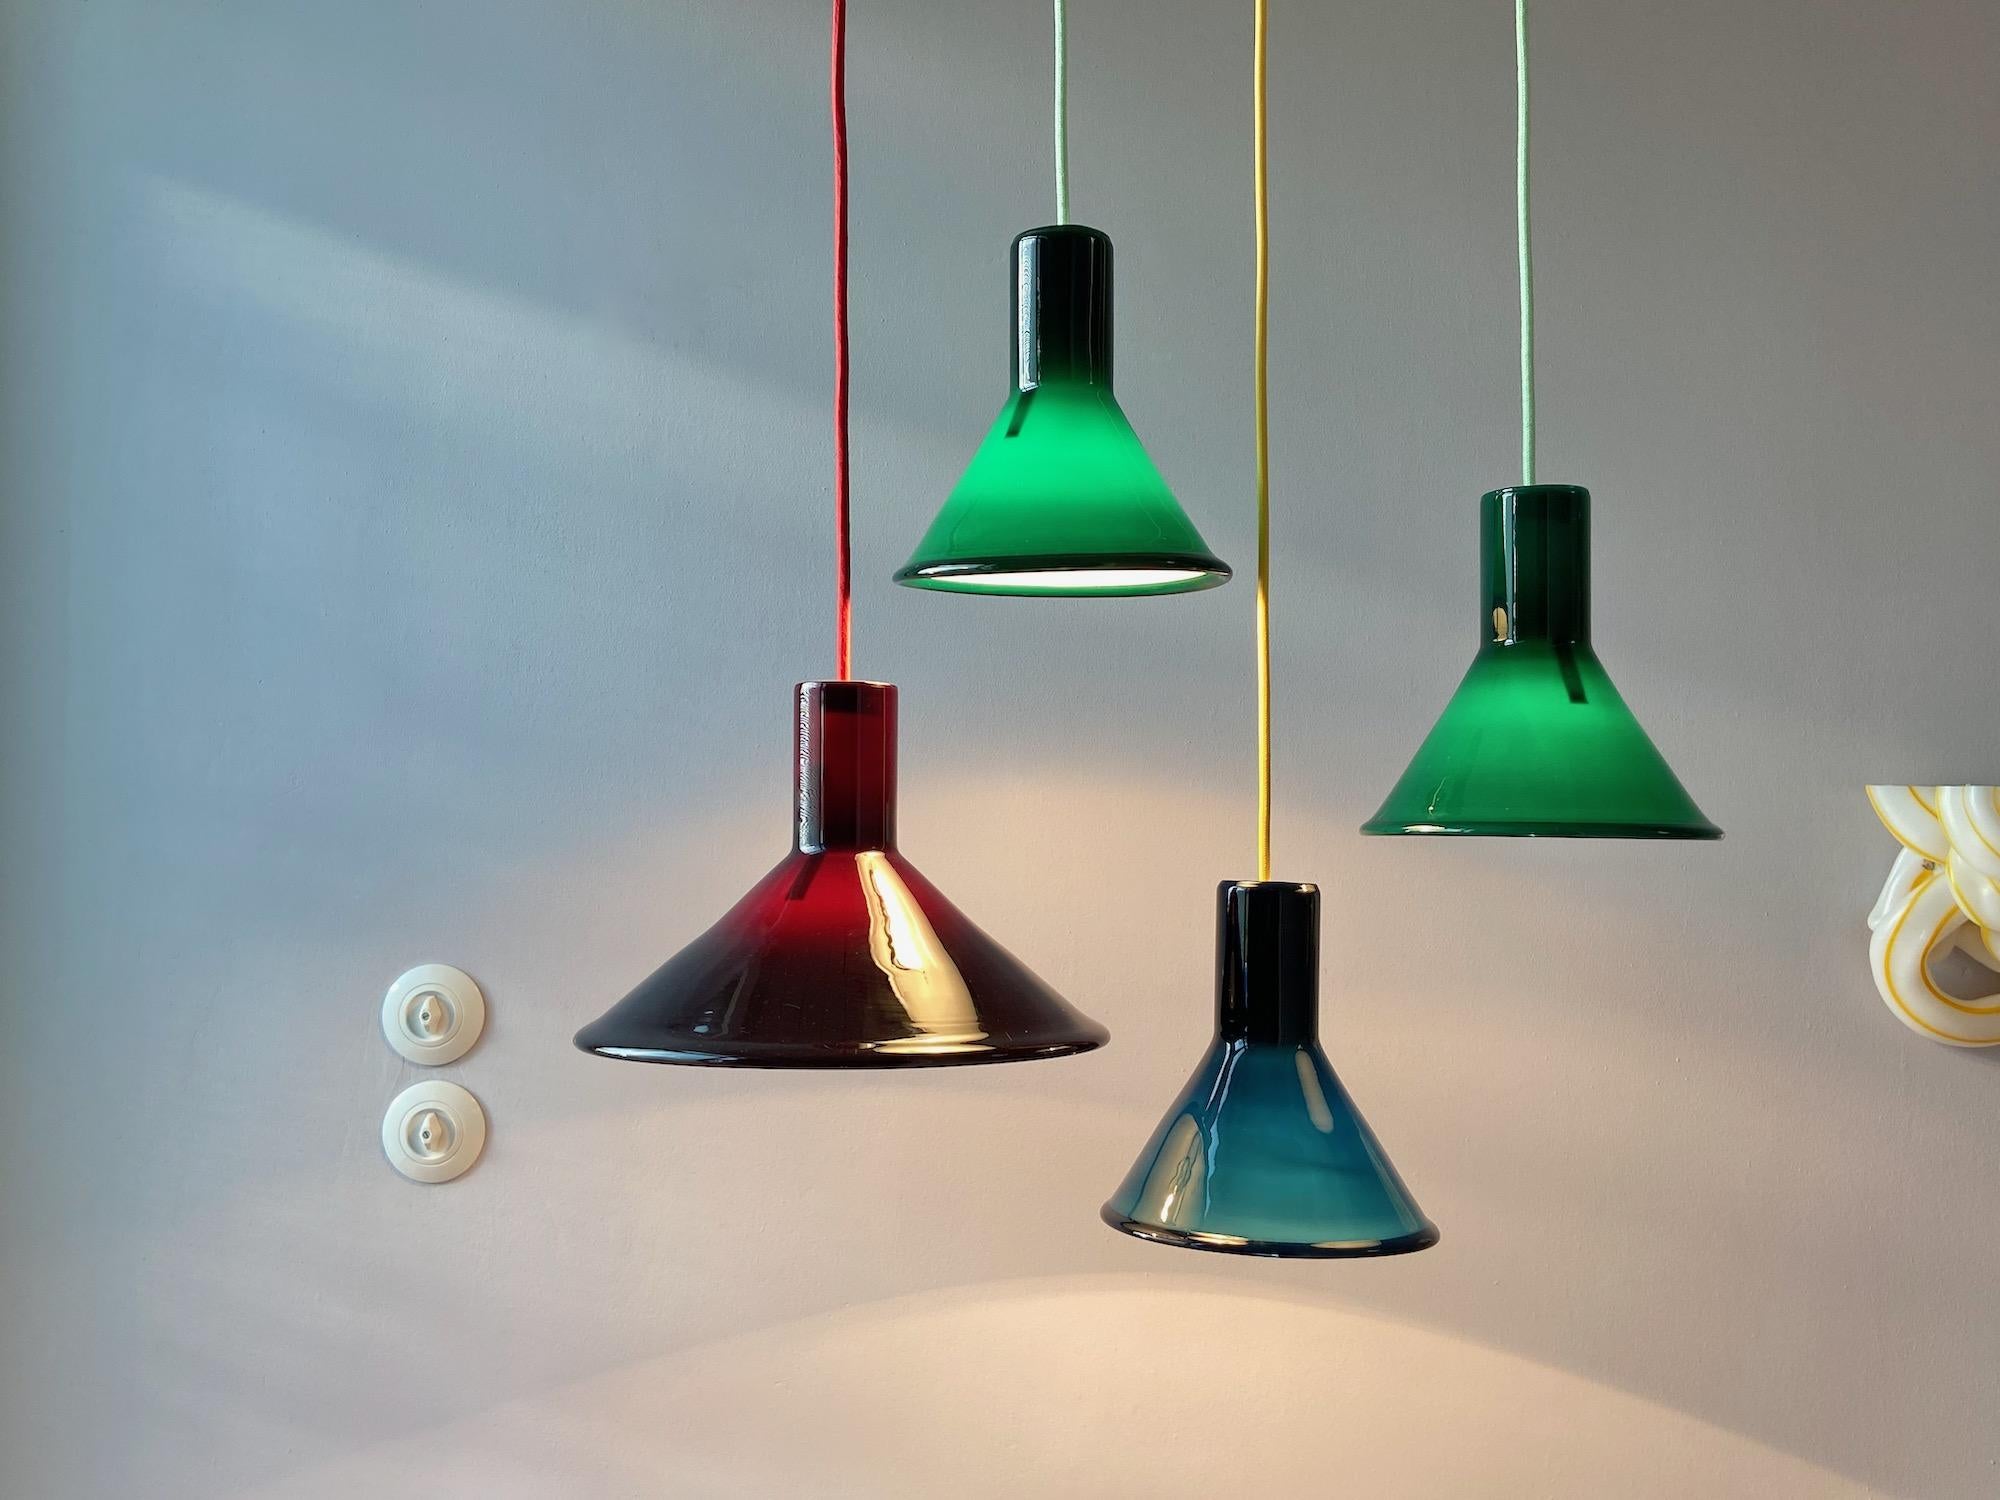 P&T pendant lamp designed by Michael Bang for Holmegaard in the 1970s. This Danish lamp is made of opaline glass and is black/aubergine on the outside and white on the inside. The lamp is in very good condition, no damages and comes with red fabric